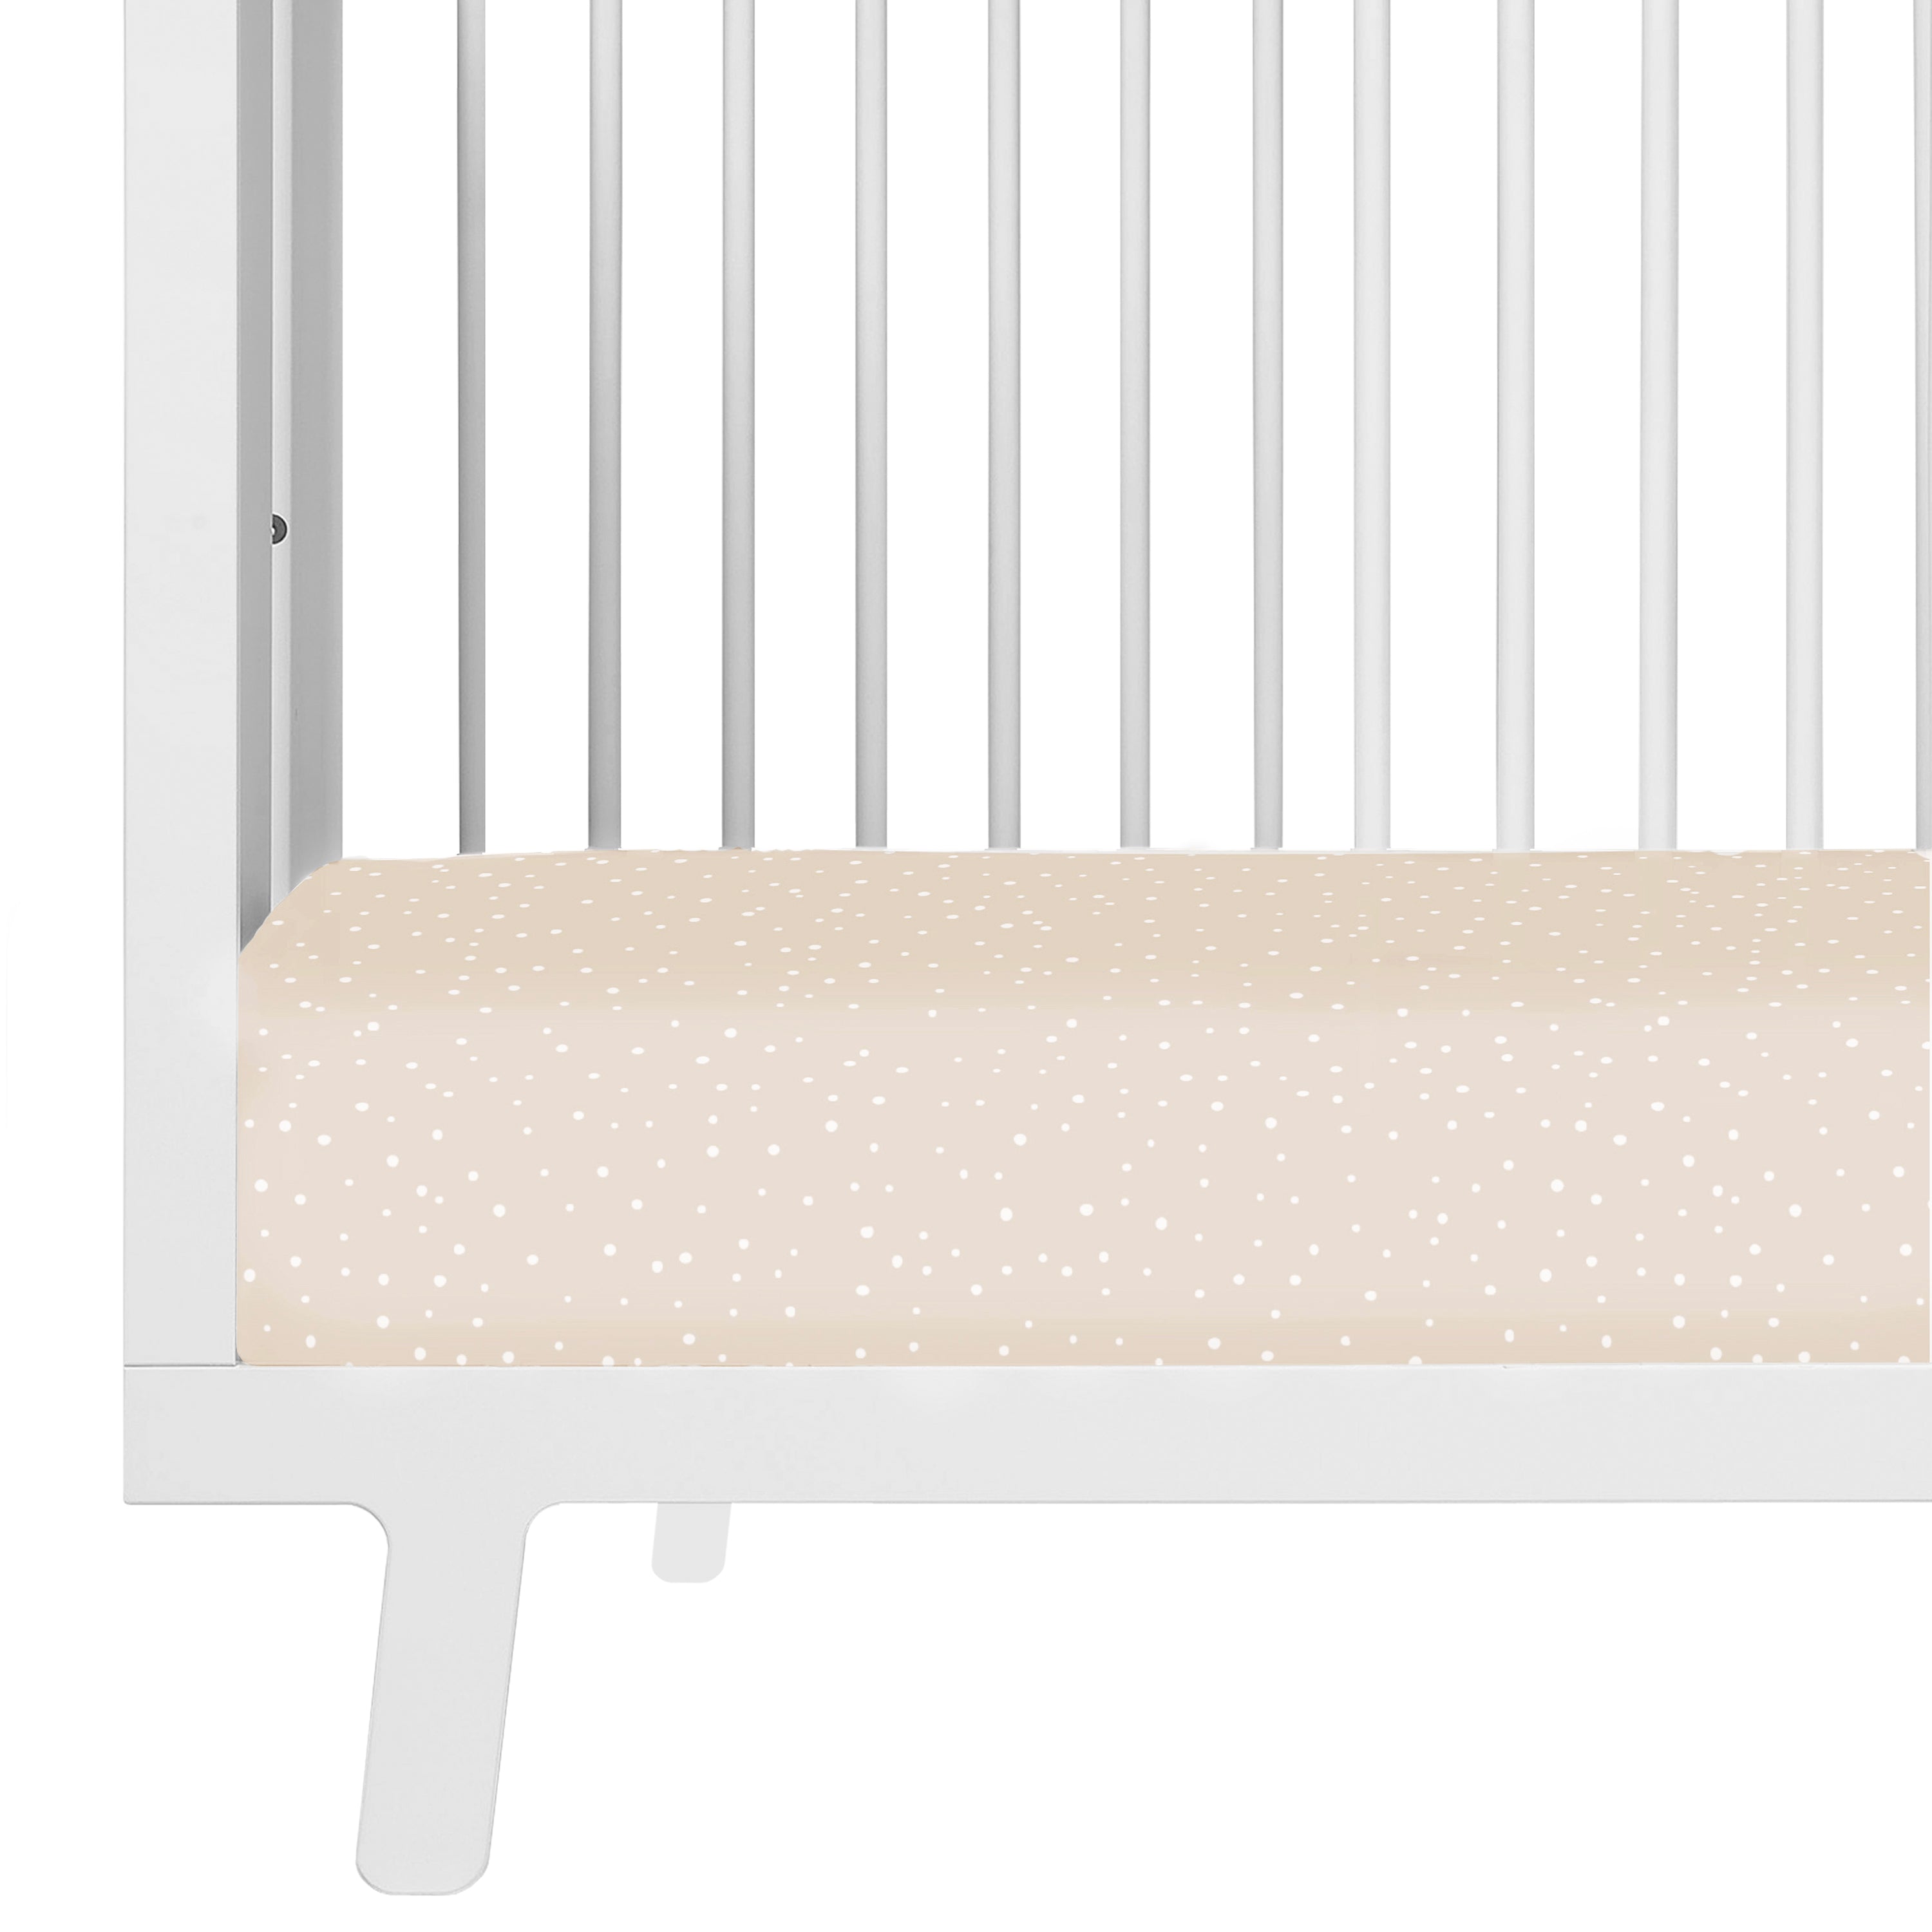 A close-up of a white Makemake Organics baby crib with a beige mattress featuring small white polka dots. The crib has vertical bars and a visible leg with a simple design.